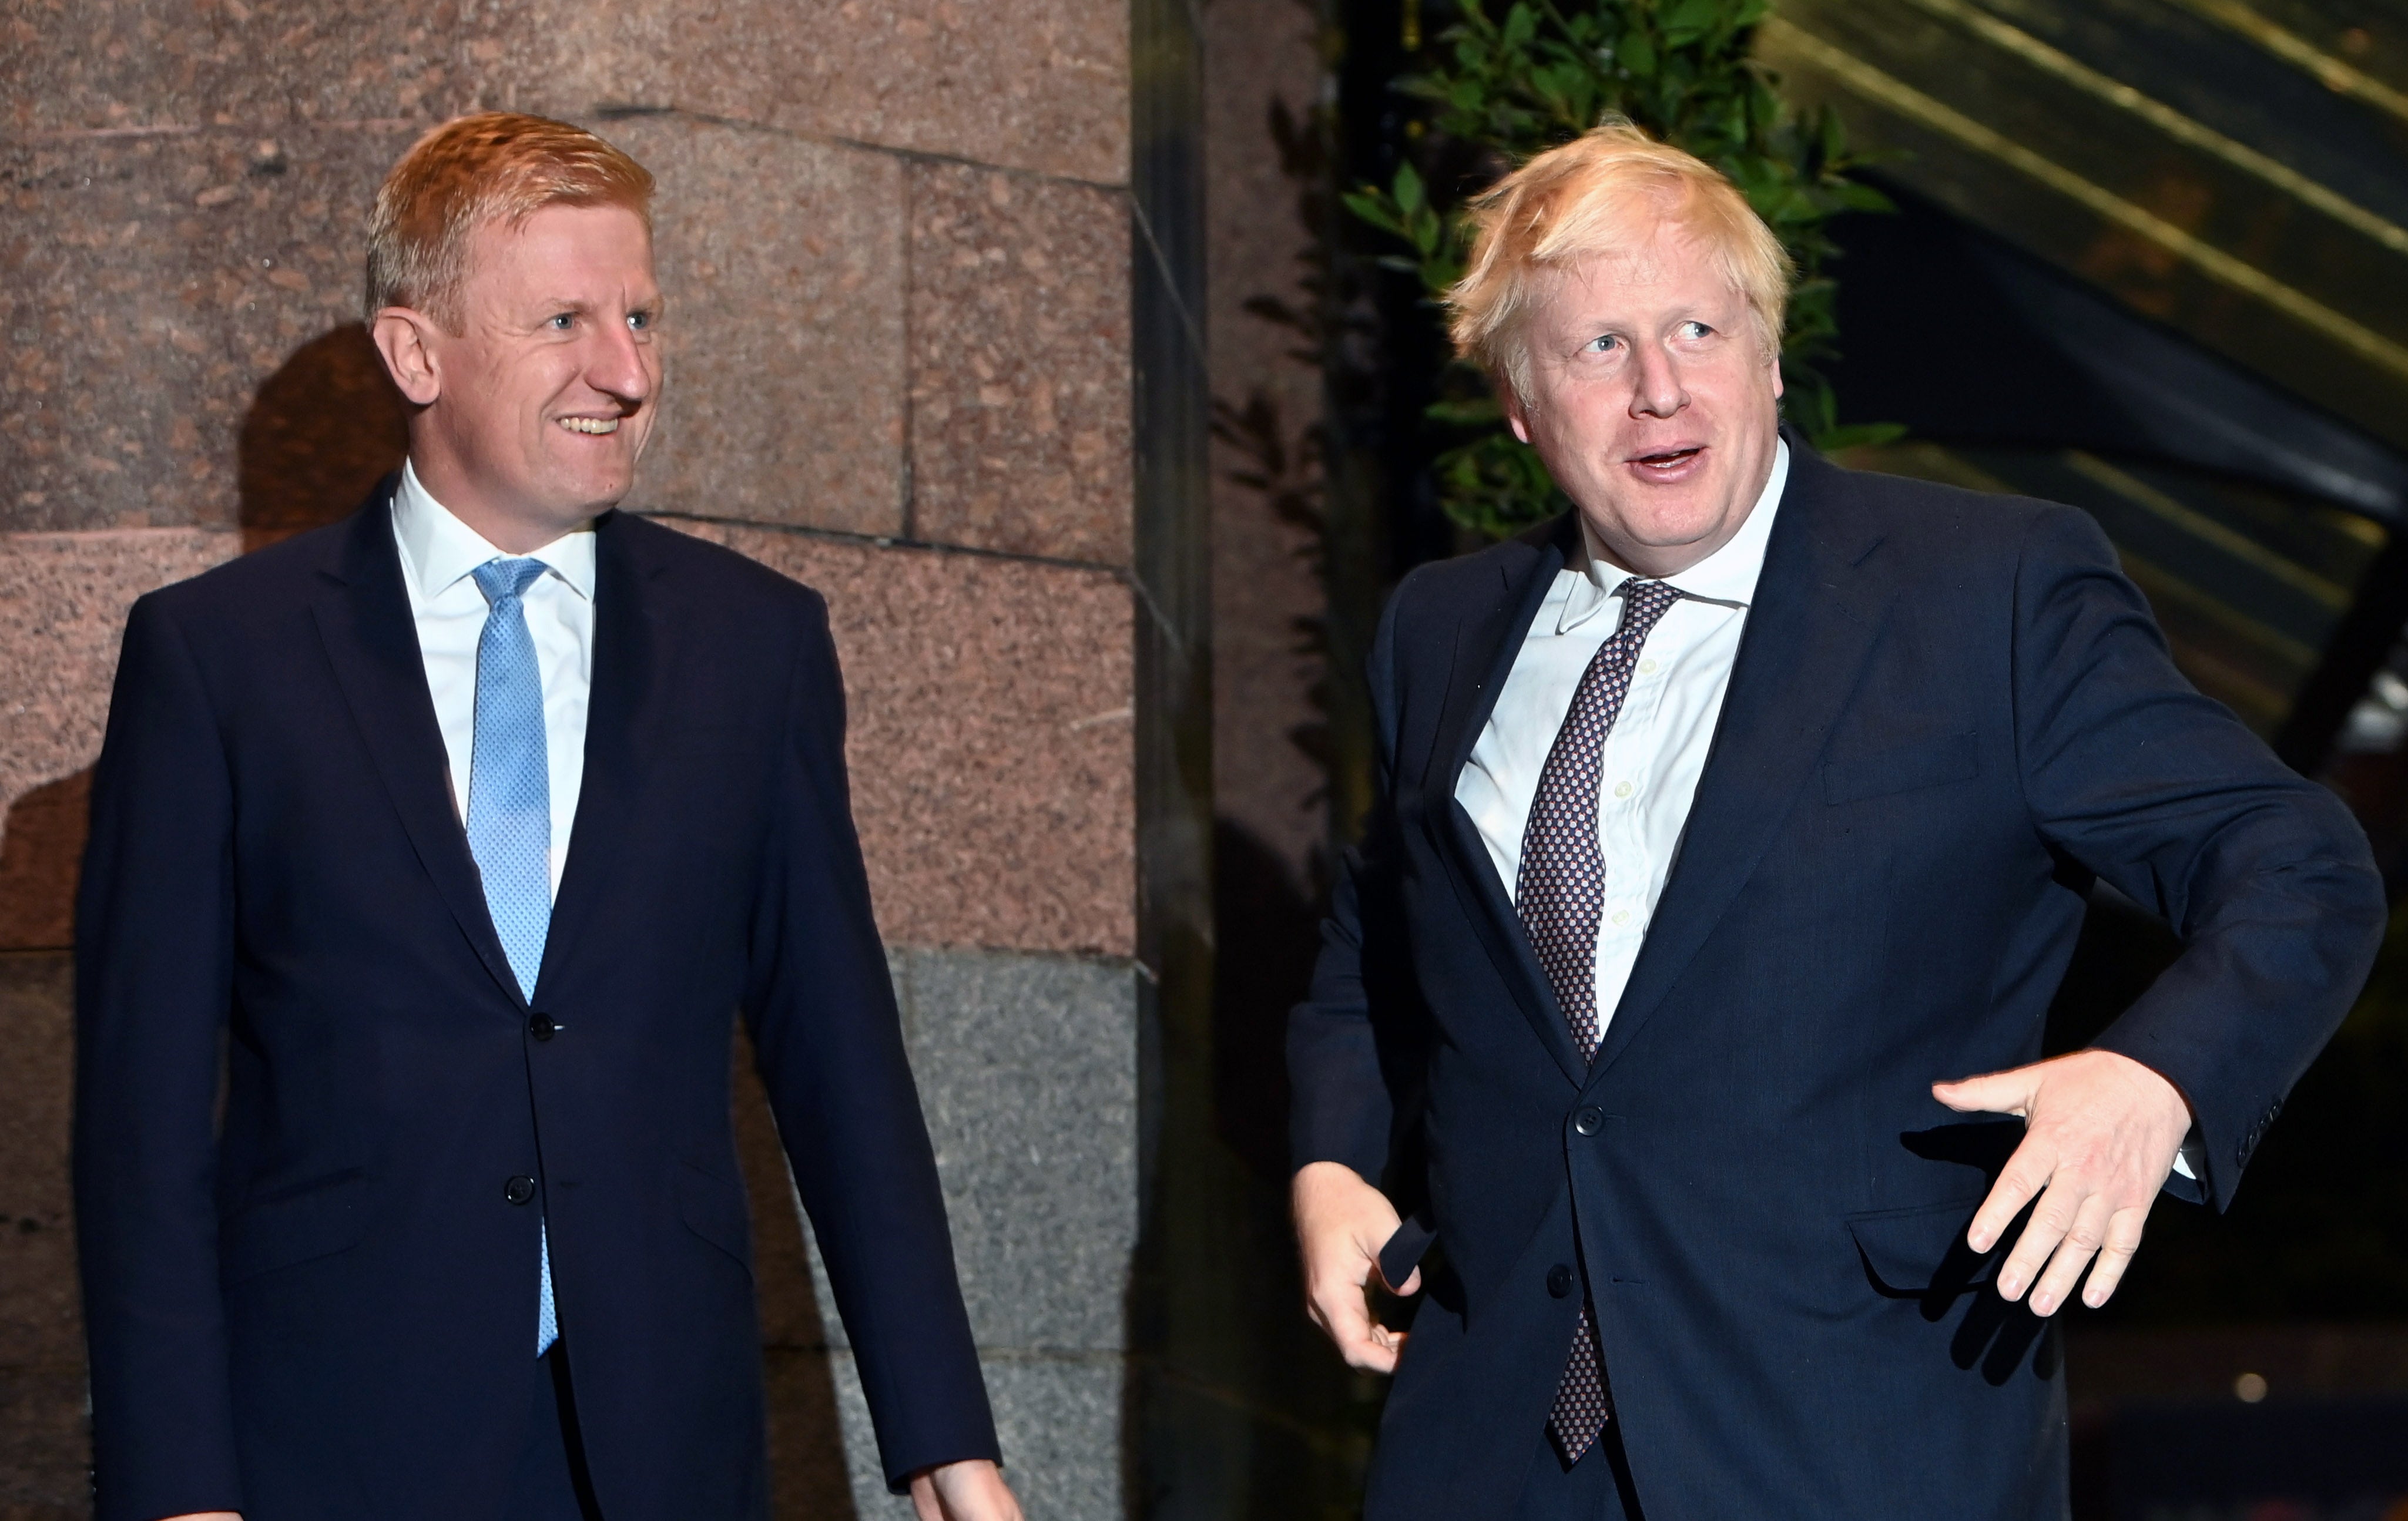 Johnson’s allies have accused Oliver Dowden of a ‘political stitch-up’ after the ex-PM’s diaries were handed to police